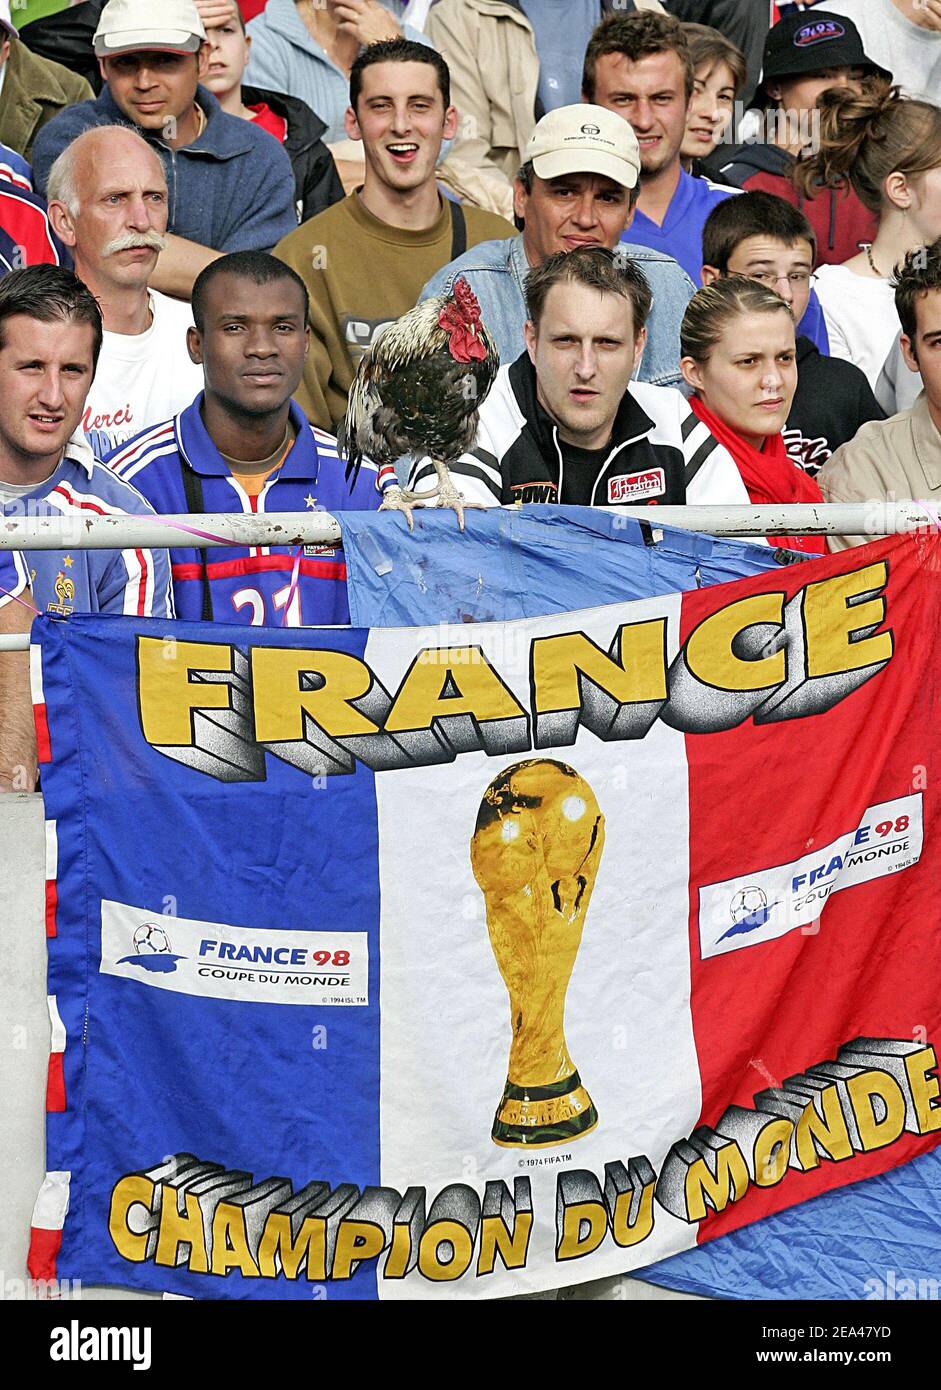 Supporters during a charity soccer match between France's 1998 World Champion team and Toulouse to benefit the association 'Connaitre les syndromes cerebelleux' (Knowing the cerebellar syndroms') and the AZF plant disaster victims, at Toulouse Stadium, southwestern France, on May 30, 2005. Photo by Patrick Bernard/ABACA Stock Photo